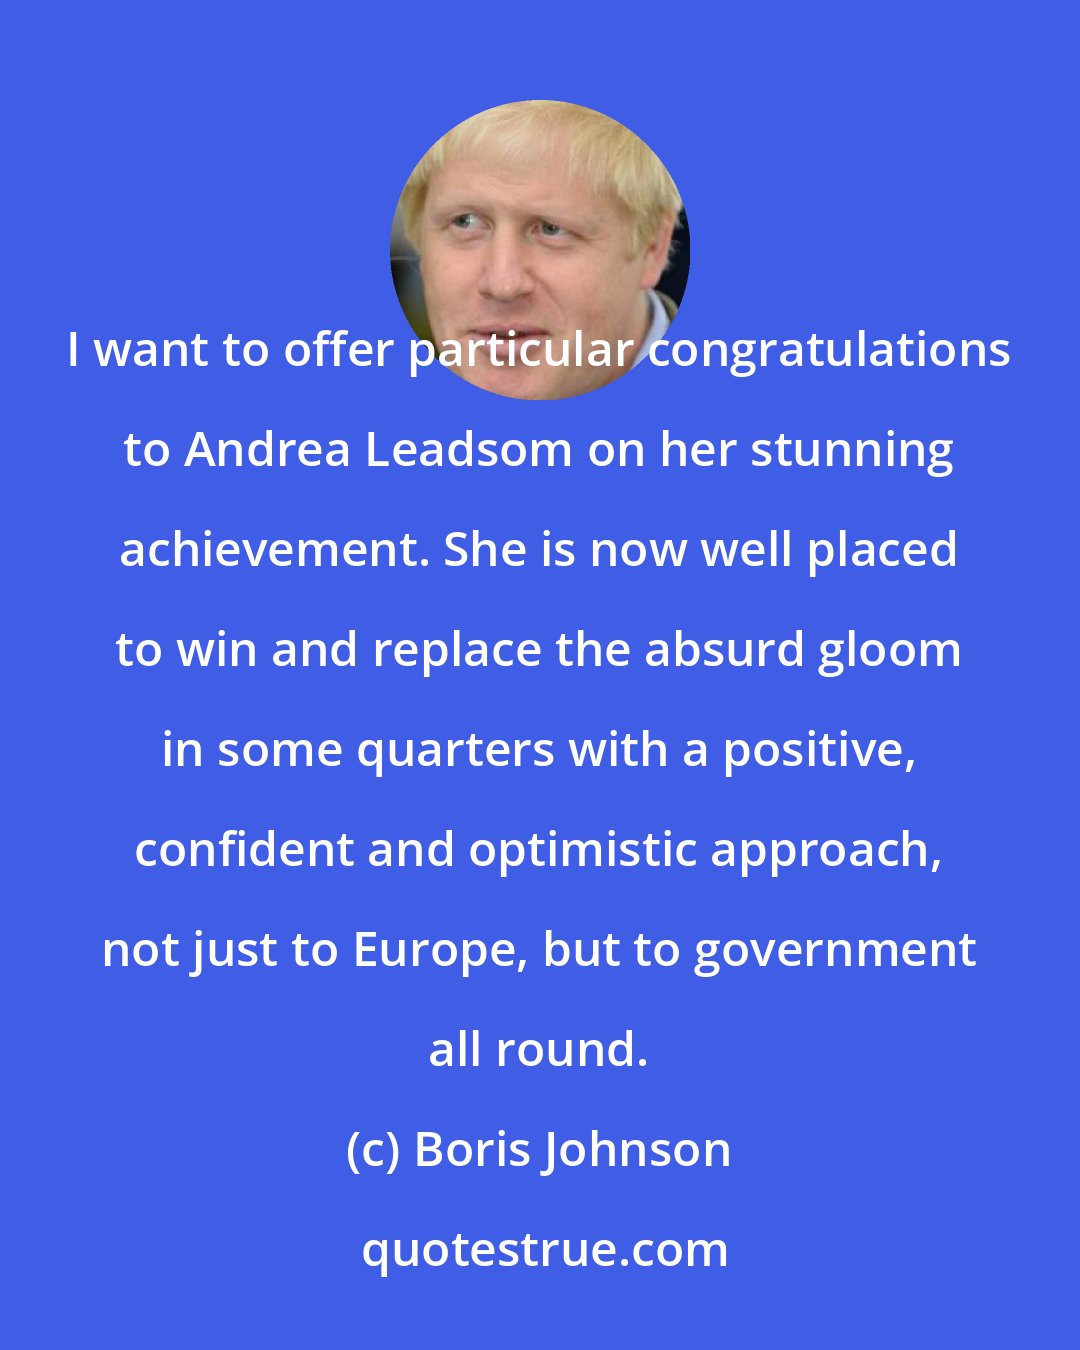 Boris Johnson: I want to offer particular congratulations to Andrea Leadsom on her stunning achievement. She is now well placed to win and replace the absurd gloom in some quarters with a positive, confident and optimistic approach, not just to Europe, but to government all round.